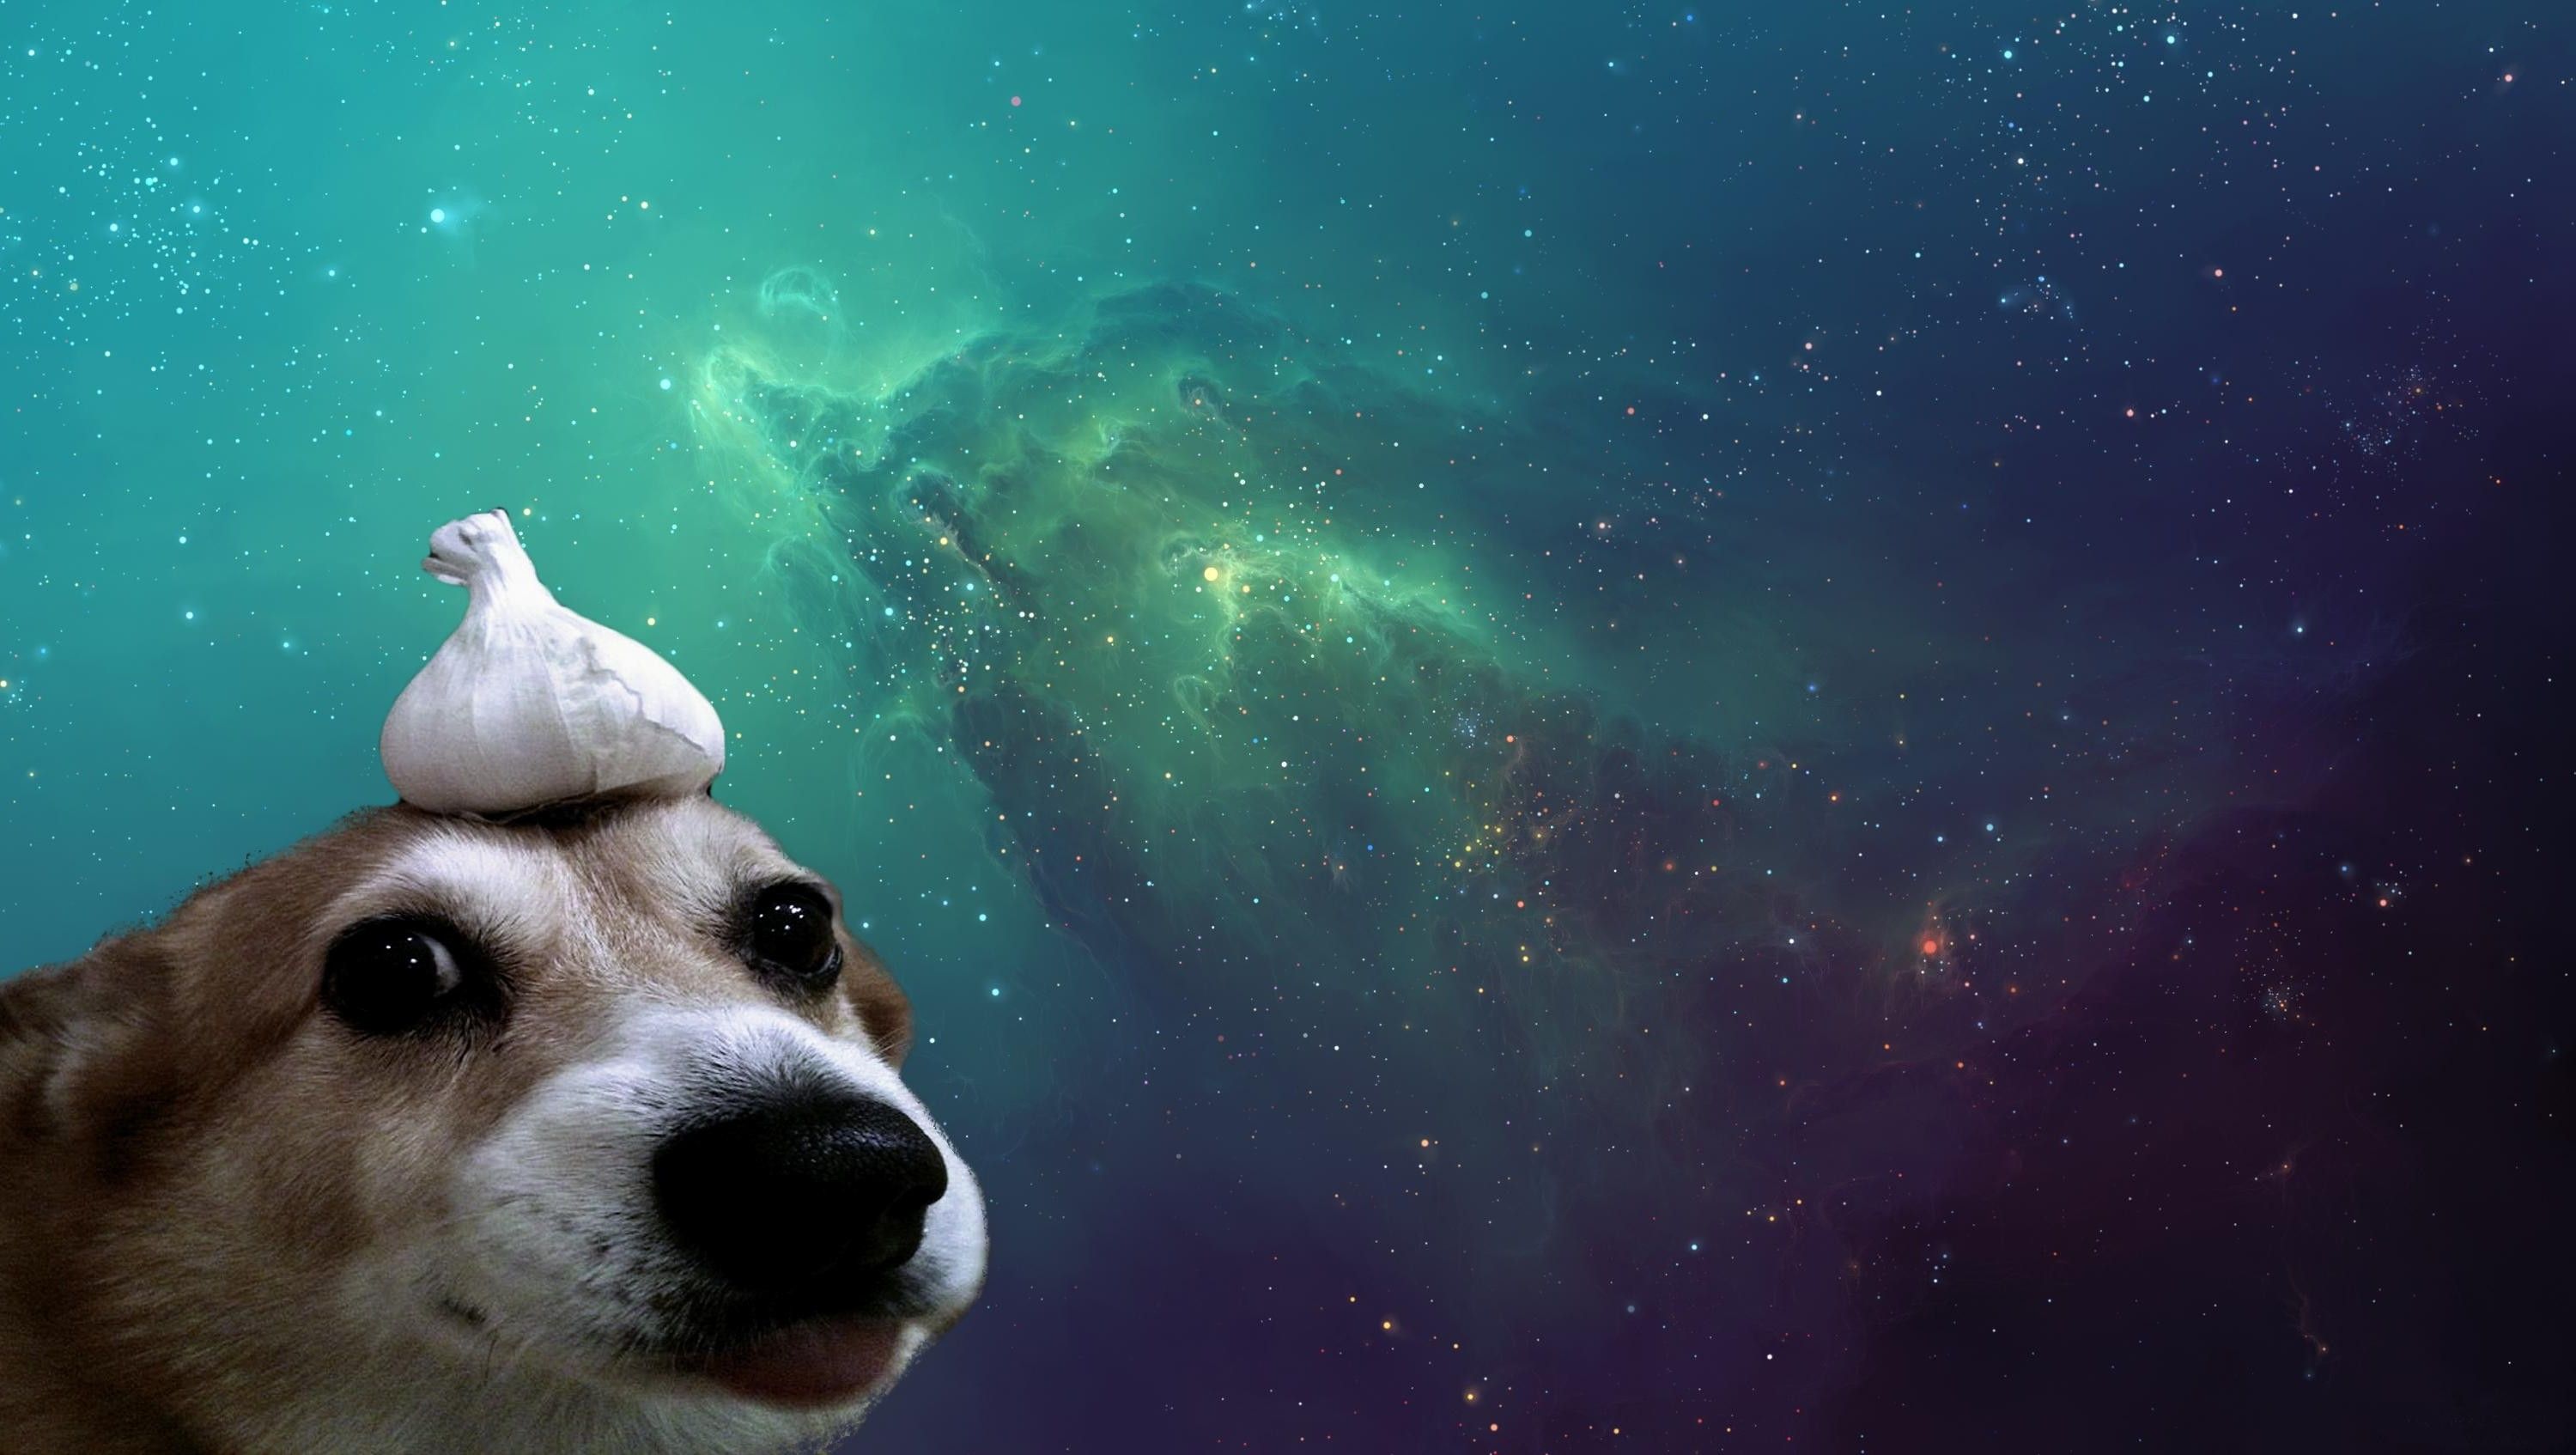 Space Dog Wallpaper Free Space Dog Background